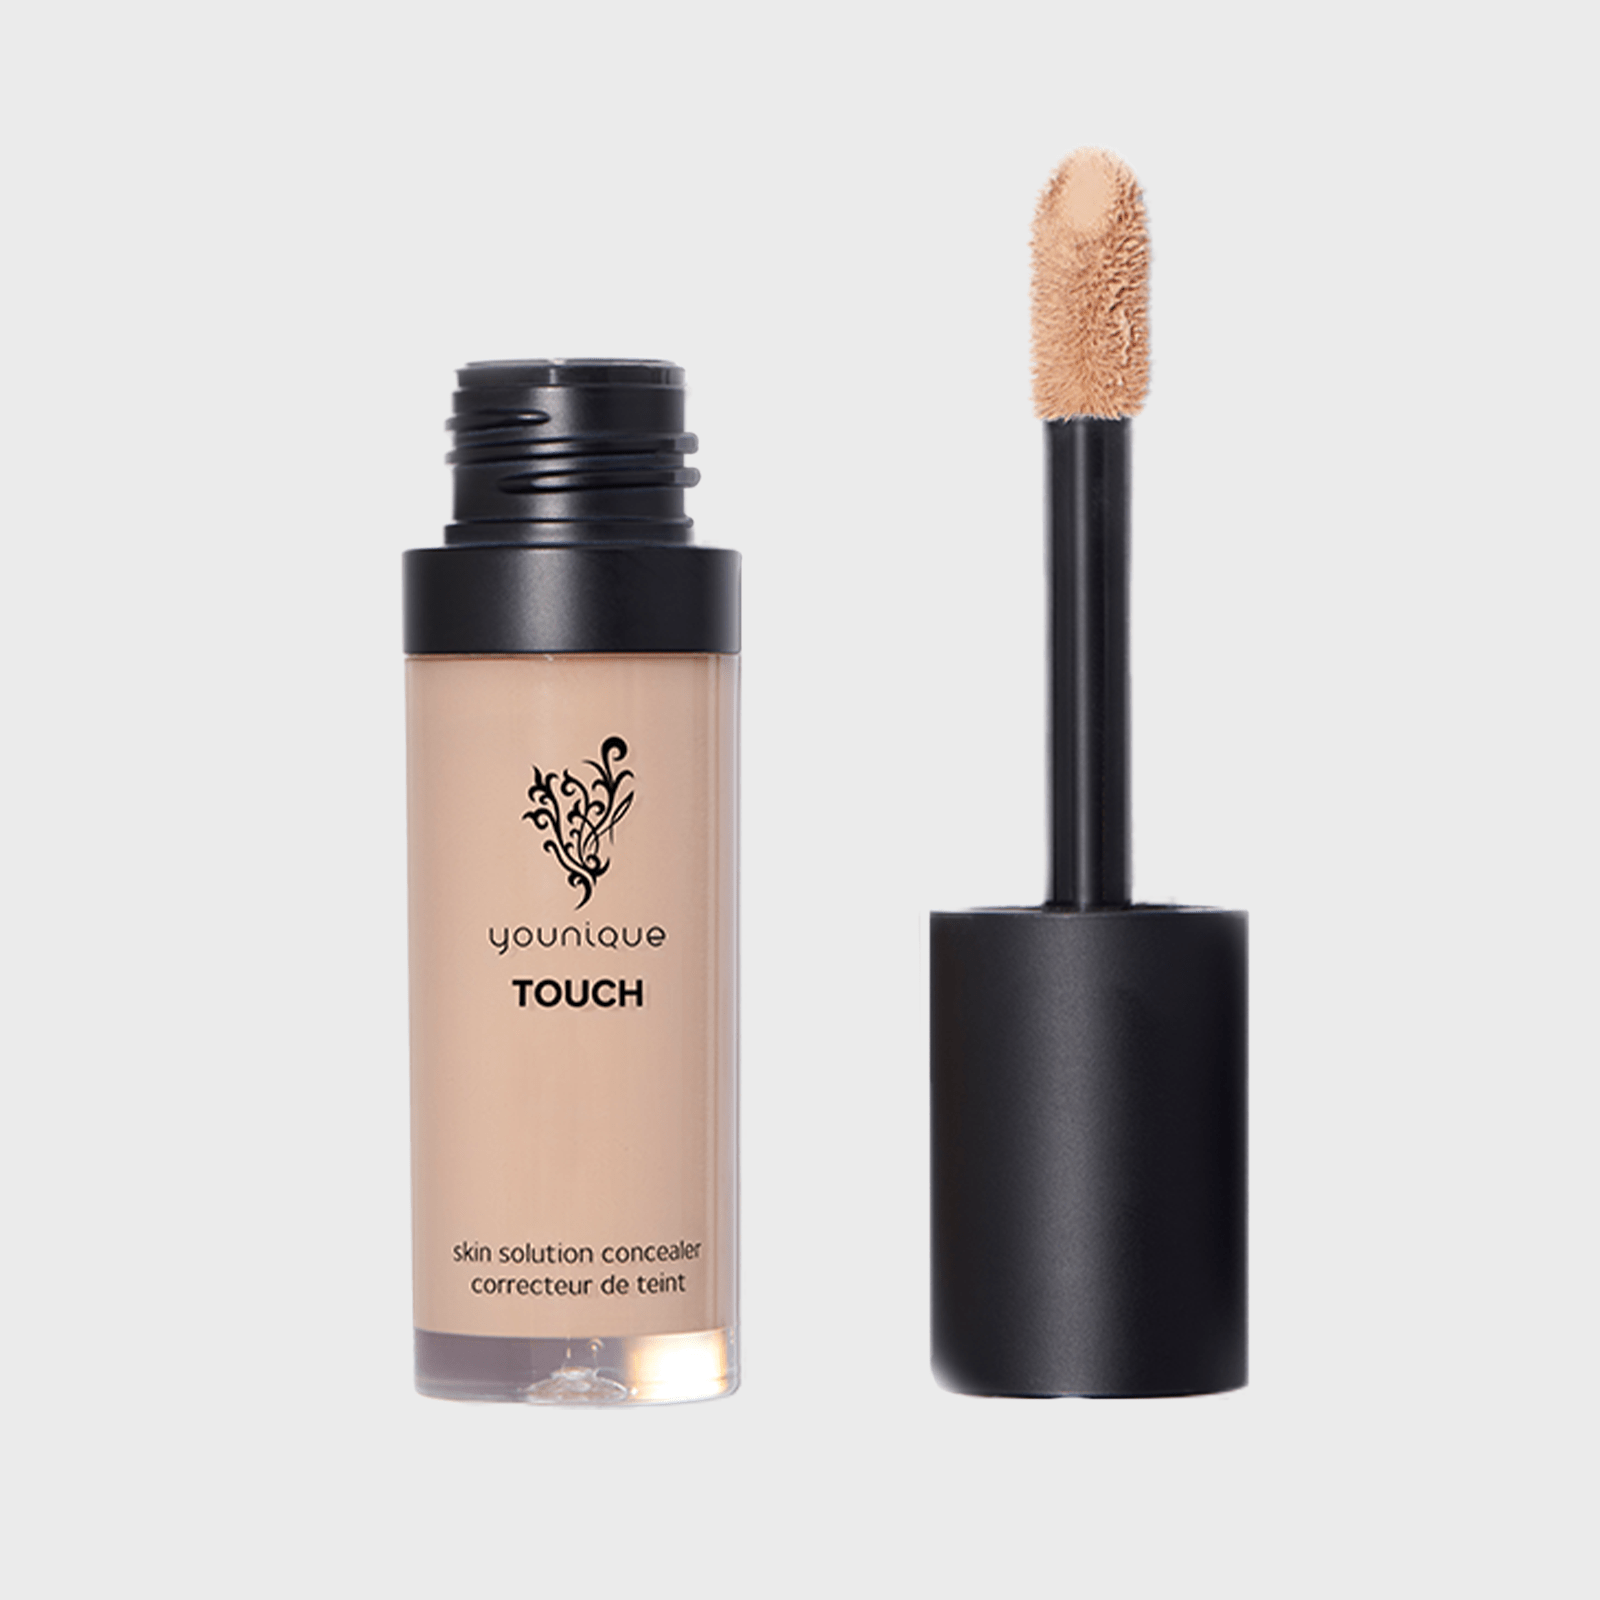 Quiet Concealing — The Best New Concealer to buy for 2023 is